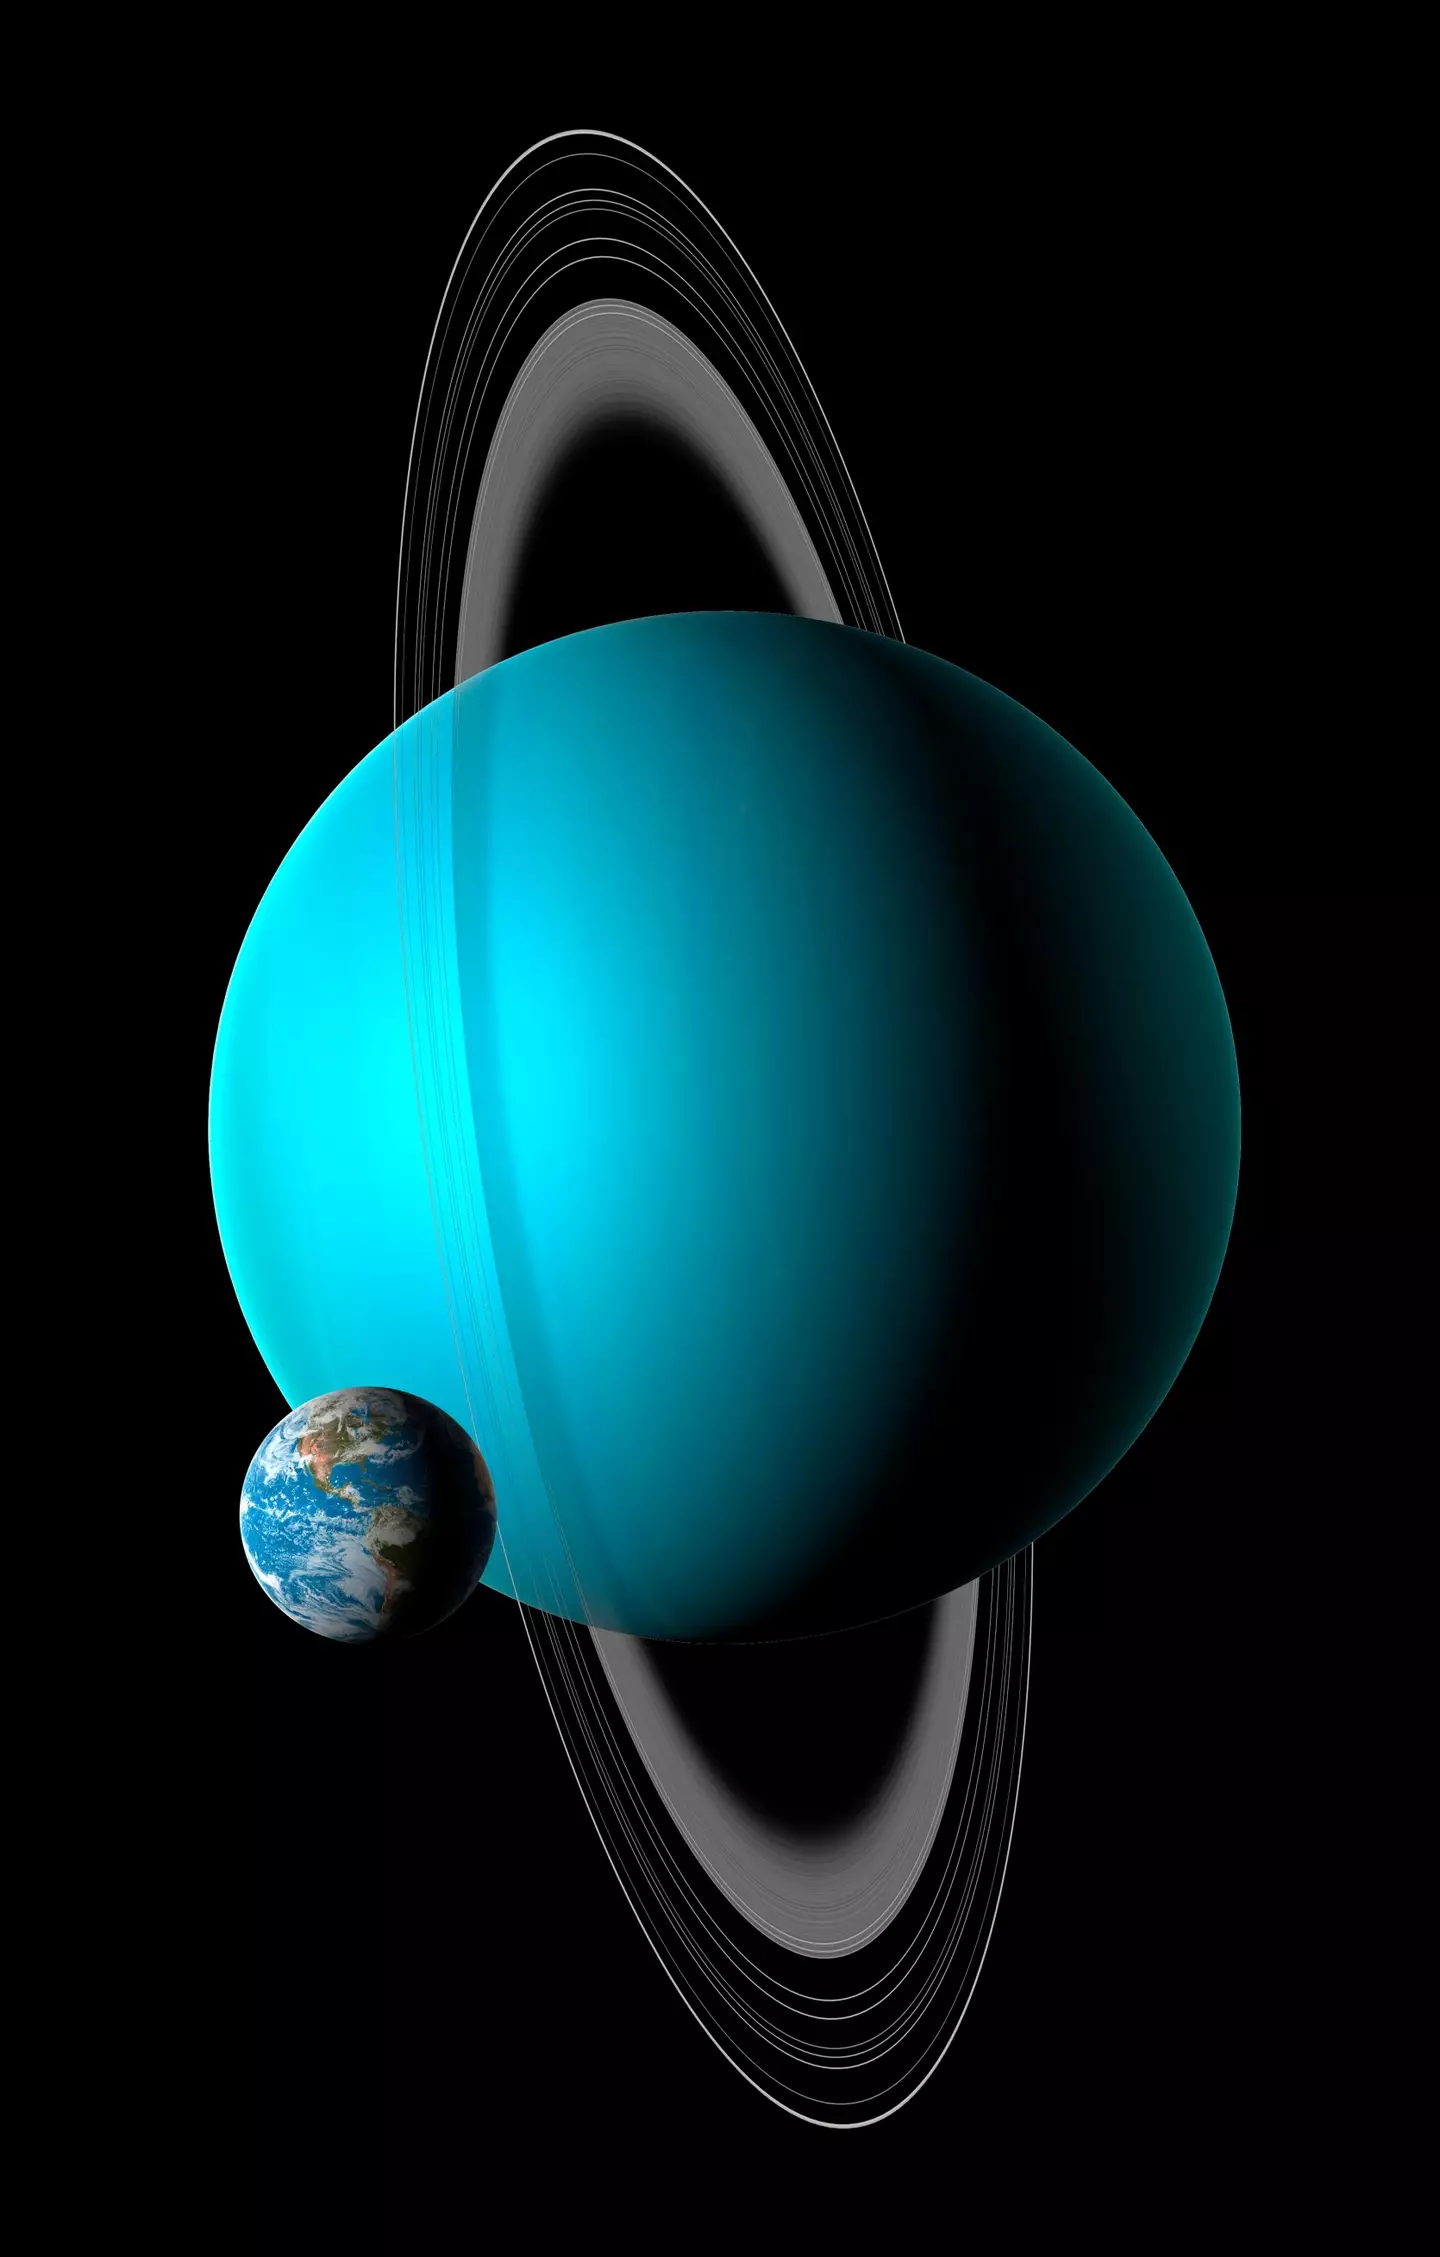 “Explaining the difference in colour between Uranus and Neptune was an unexpected bonus.”